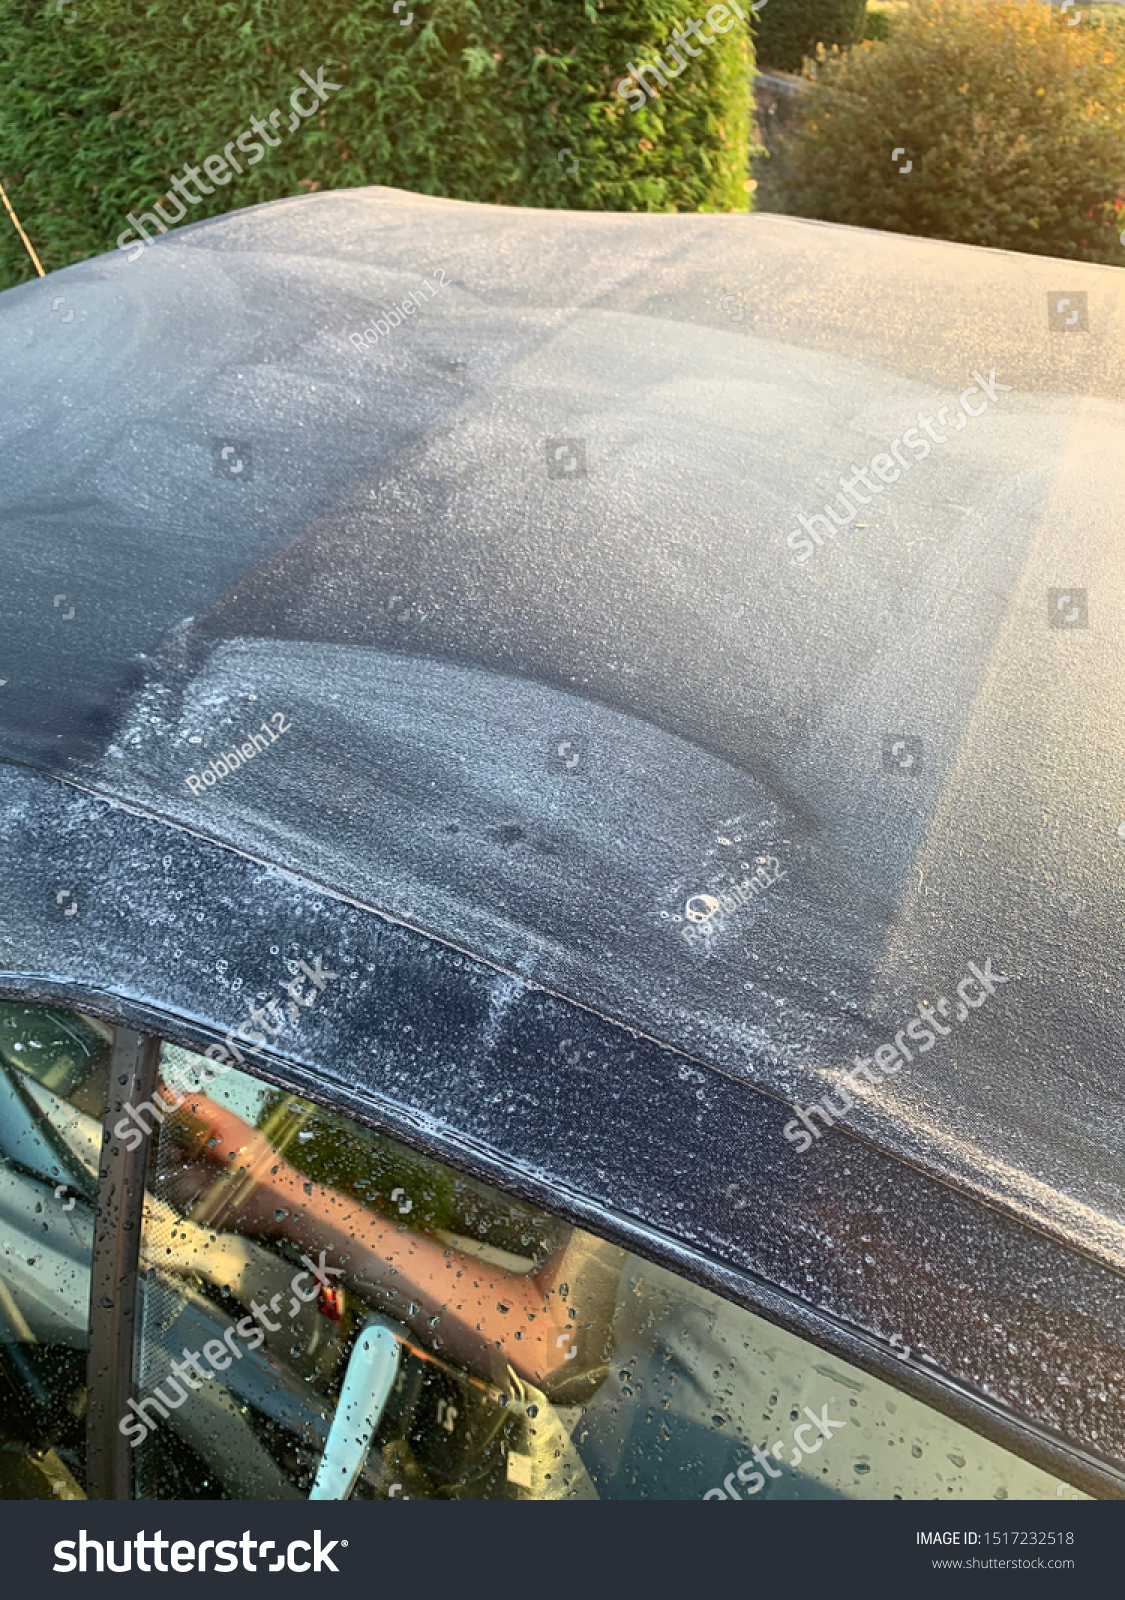 Convertible roof being cleaned with detergent cleaning product #1517232518